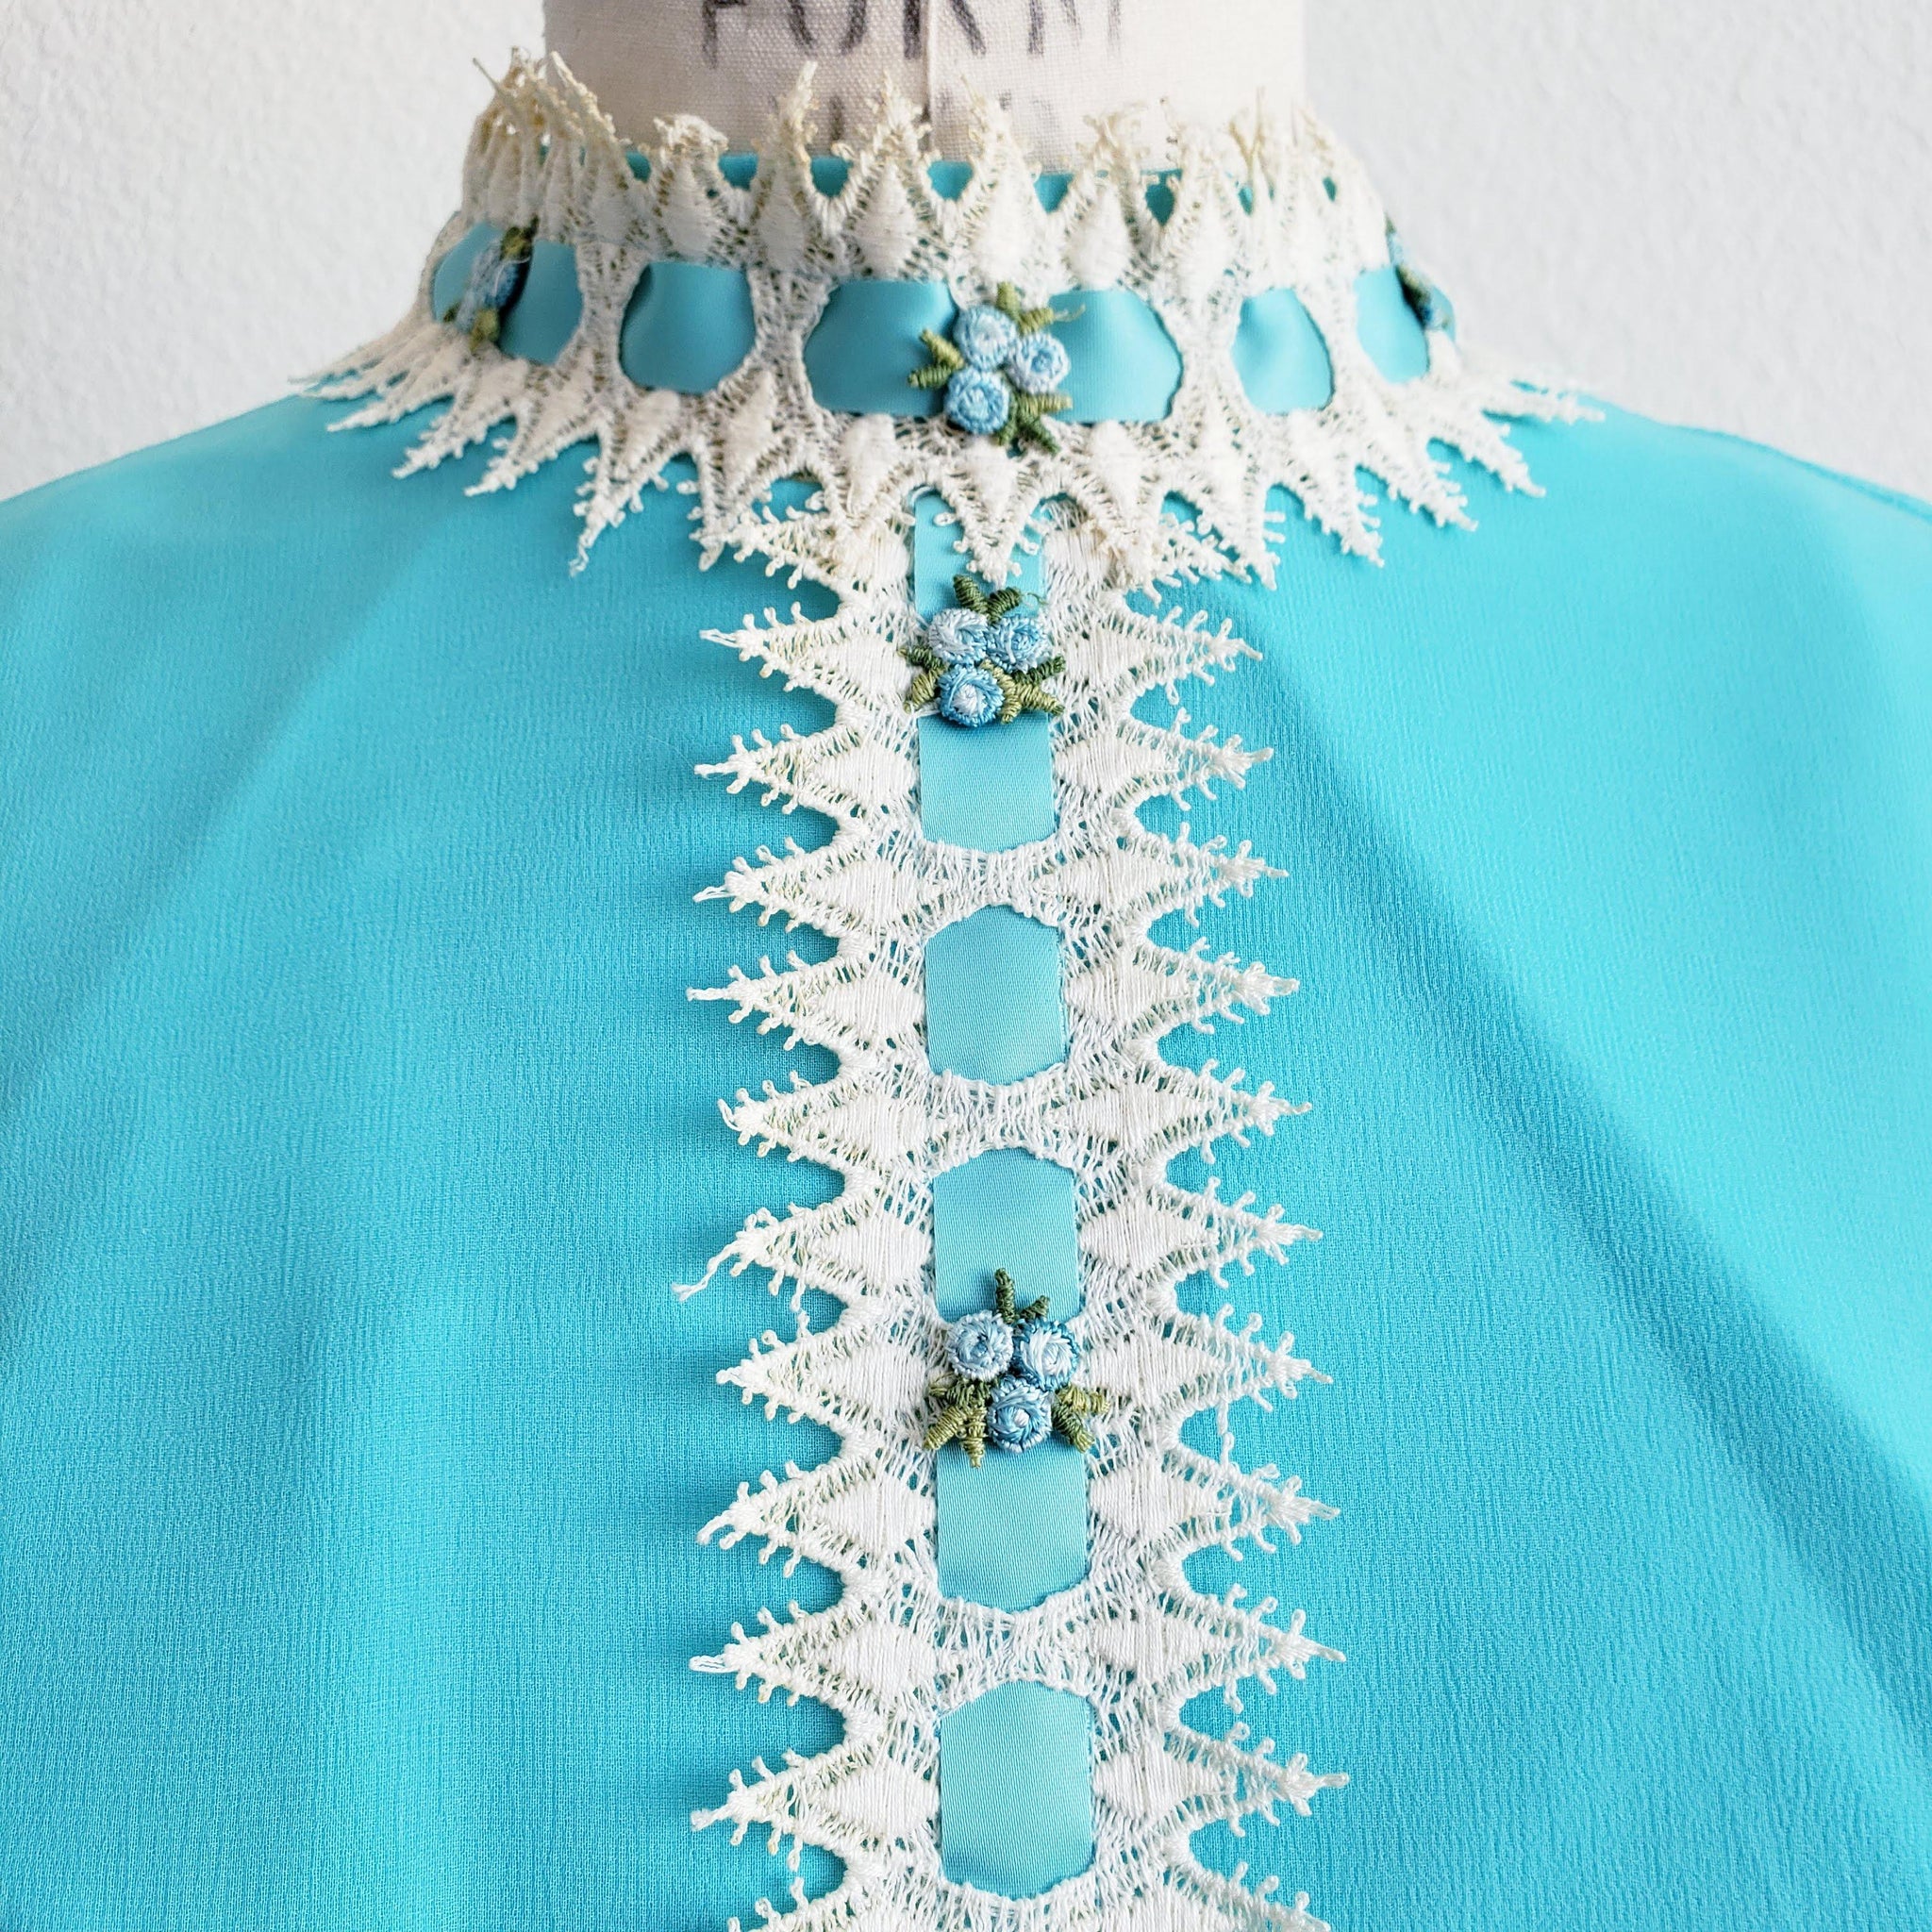 Reworked Vintage 60s Turquoise Blue Silk Tunic Blouse - ChicCityVintage